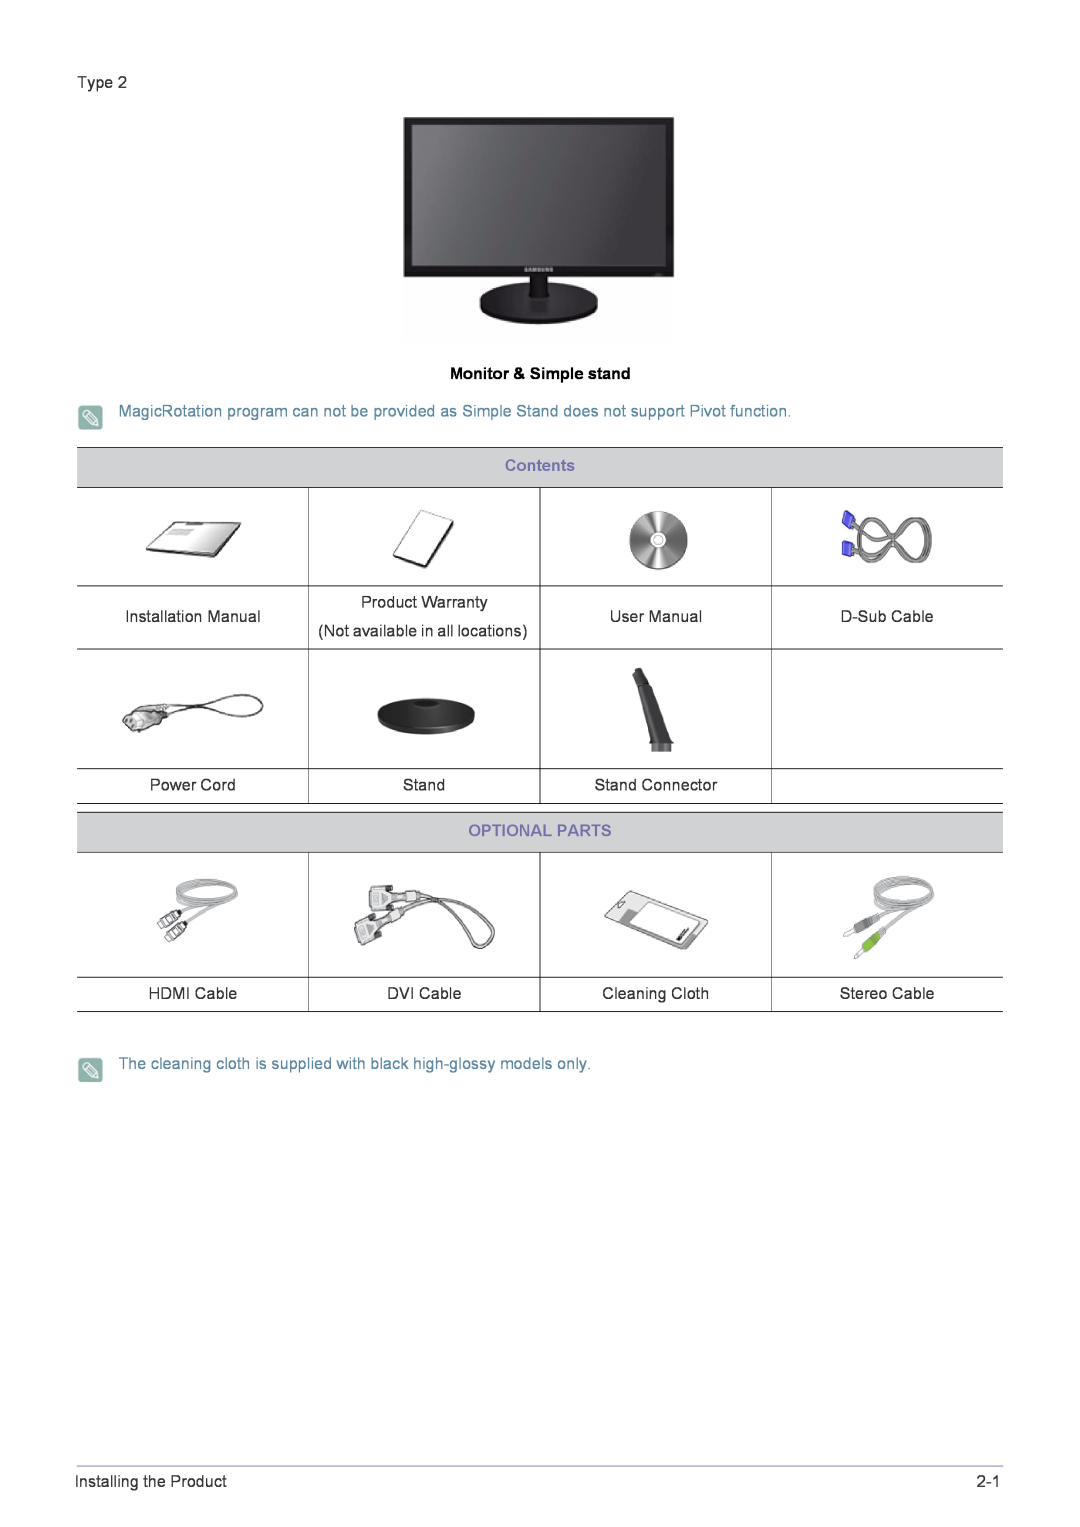 Samsung B2240MWX user manual Monitor & Simple stand, Contents, Optional Parts 